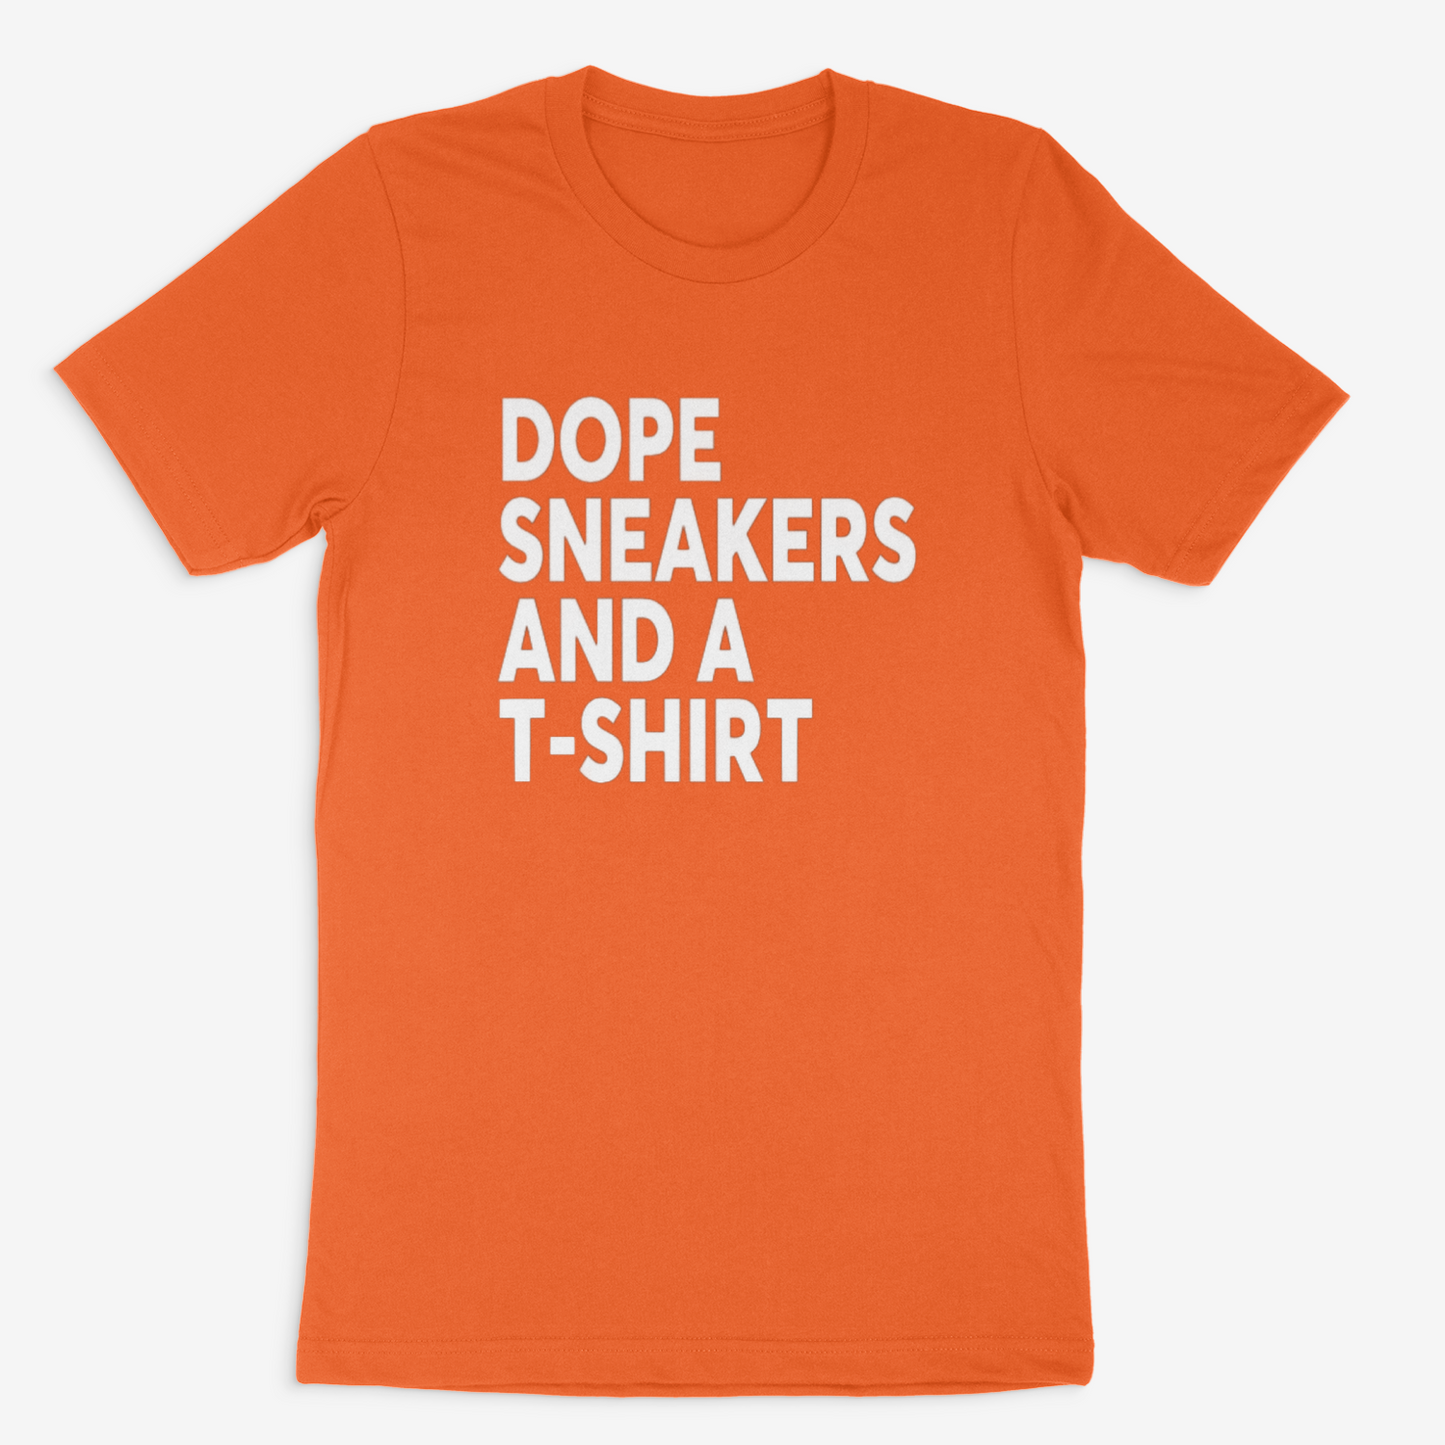 Dope Sneakers and a T-Shirt